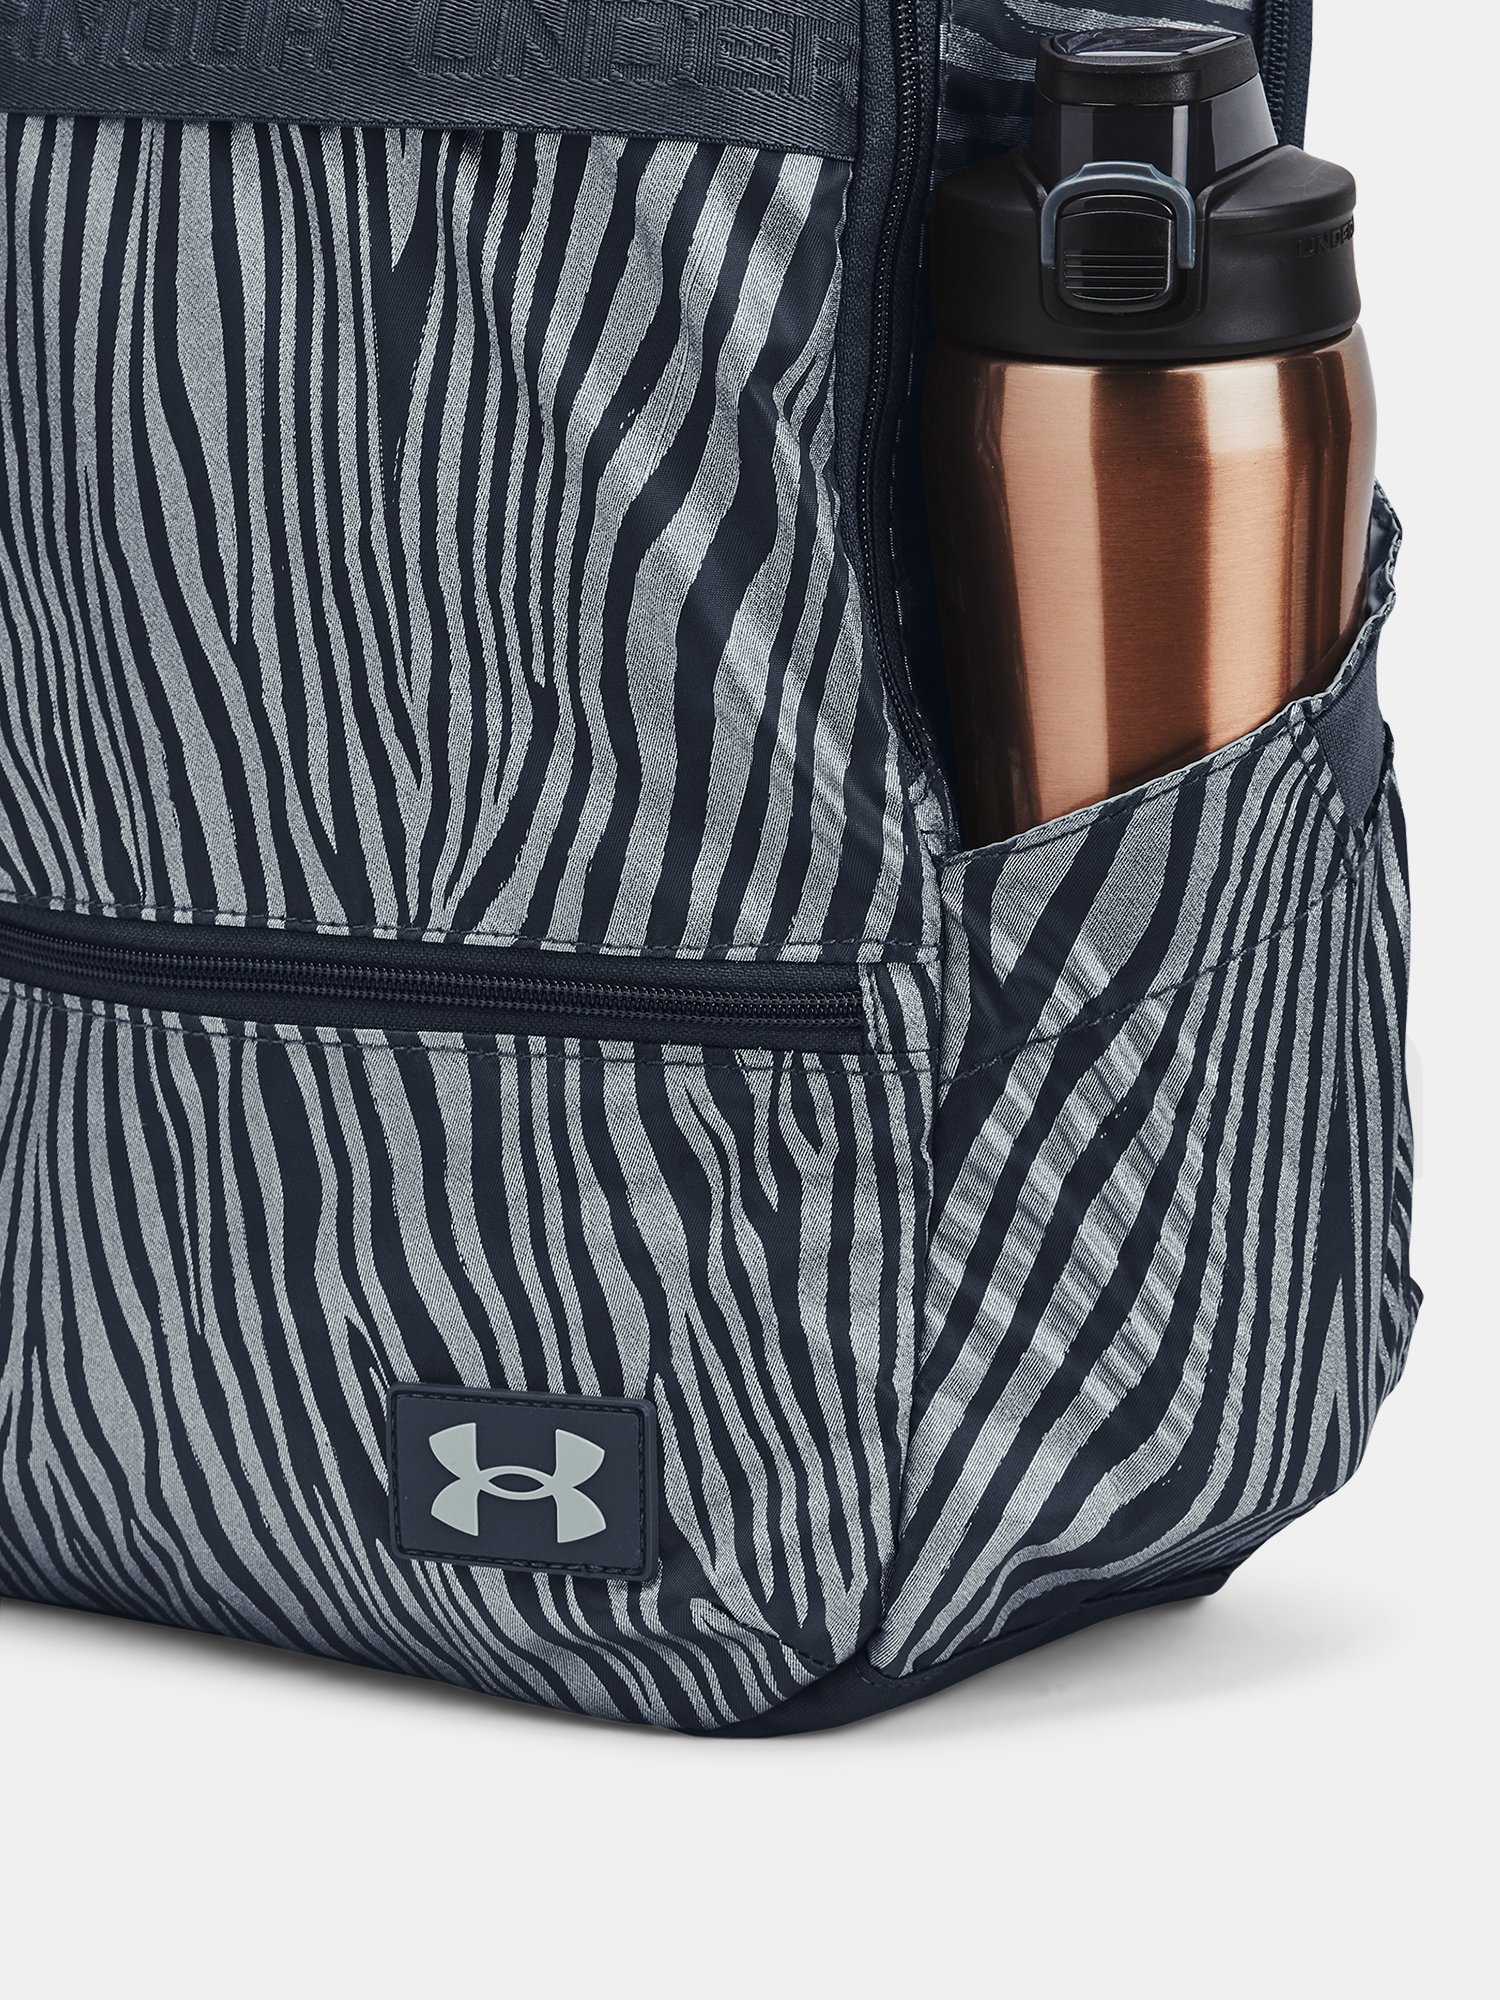 Batoh Under Armour UA Essentials Backpack-GRY